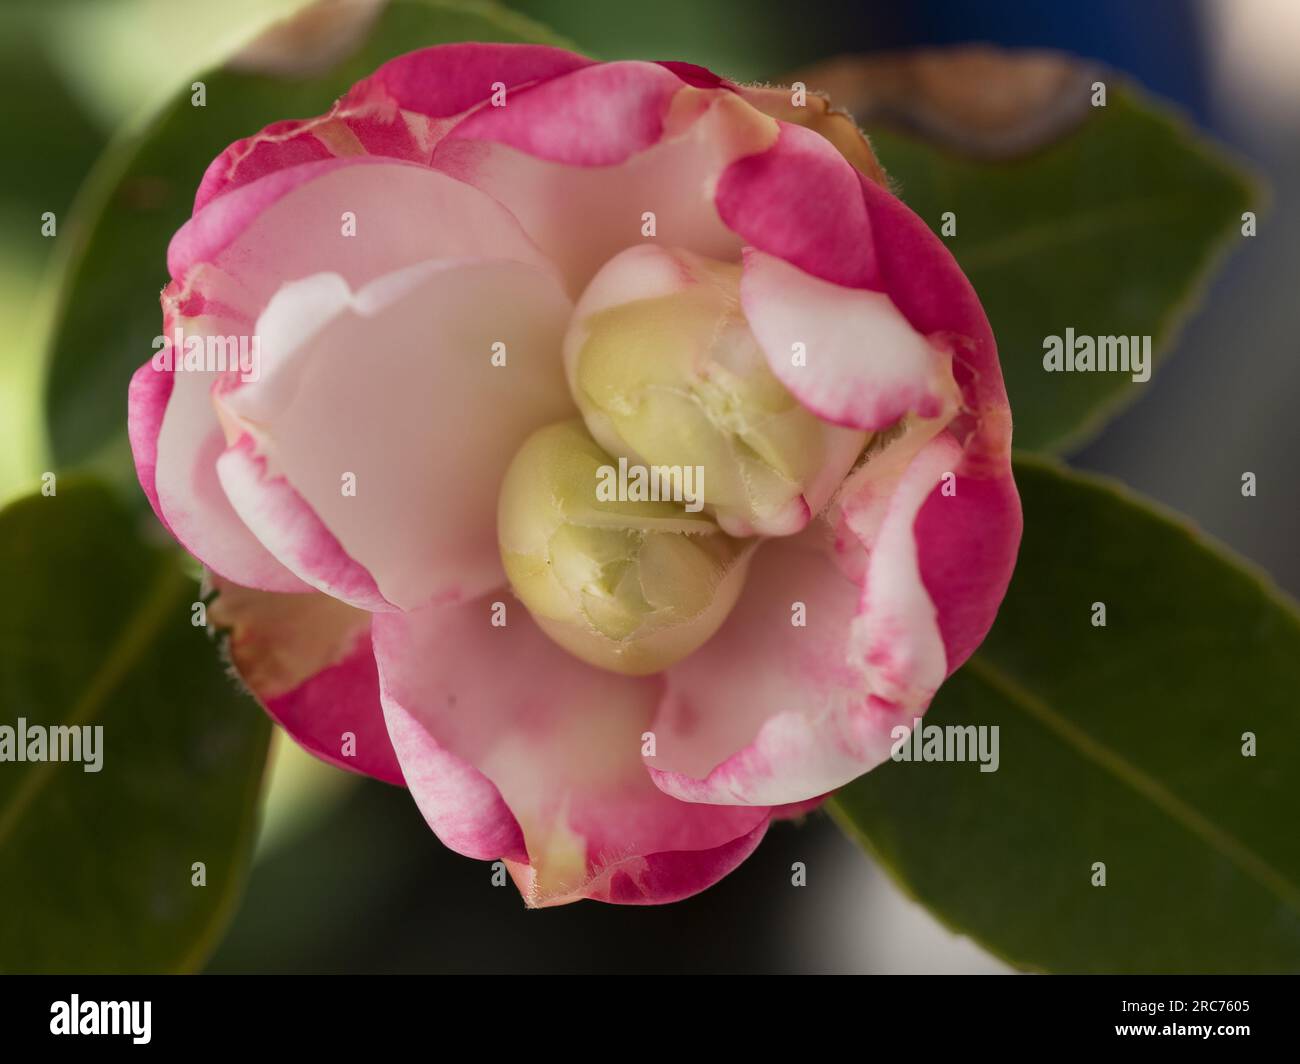 Pink and white Camellia flower blooming Stock Photo